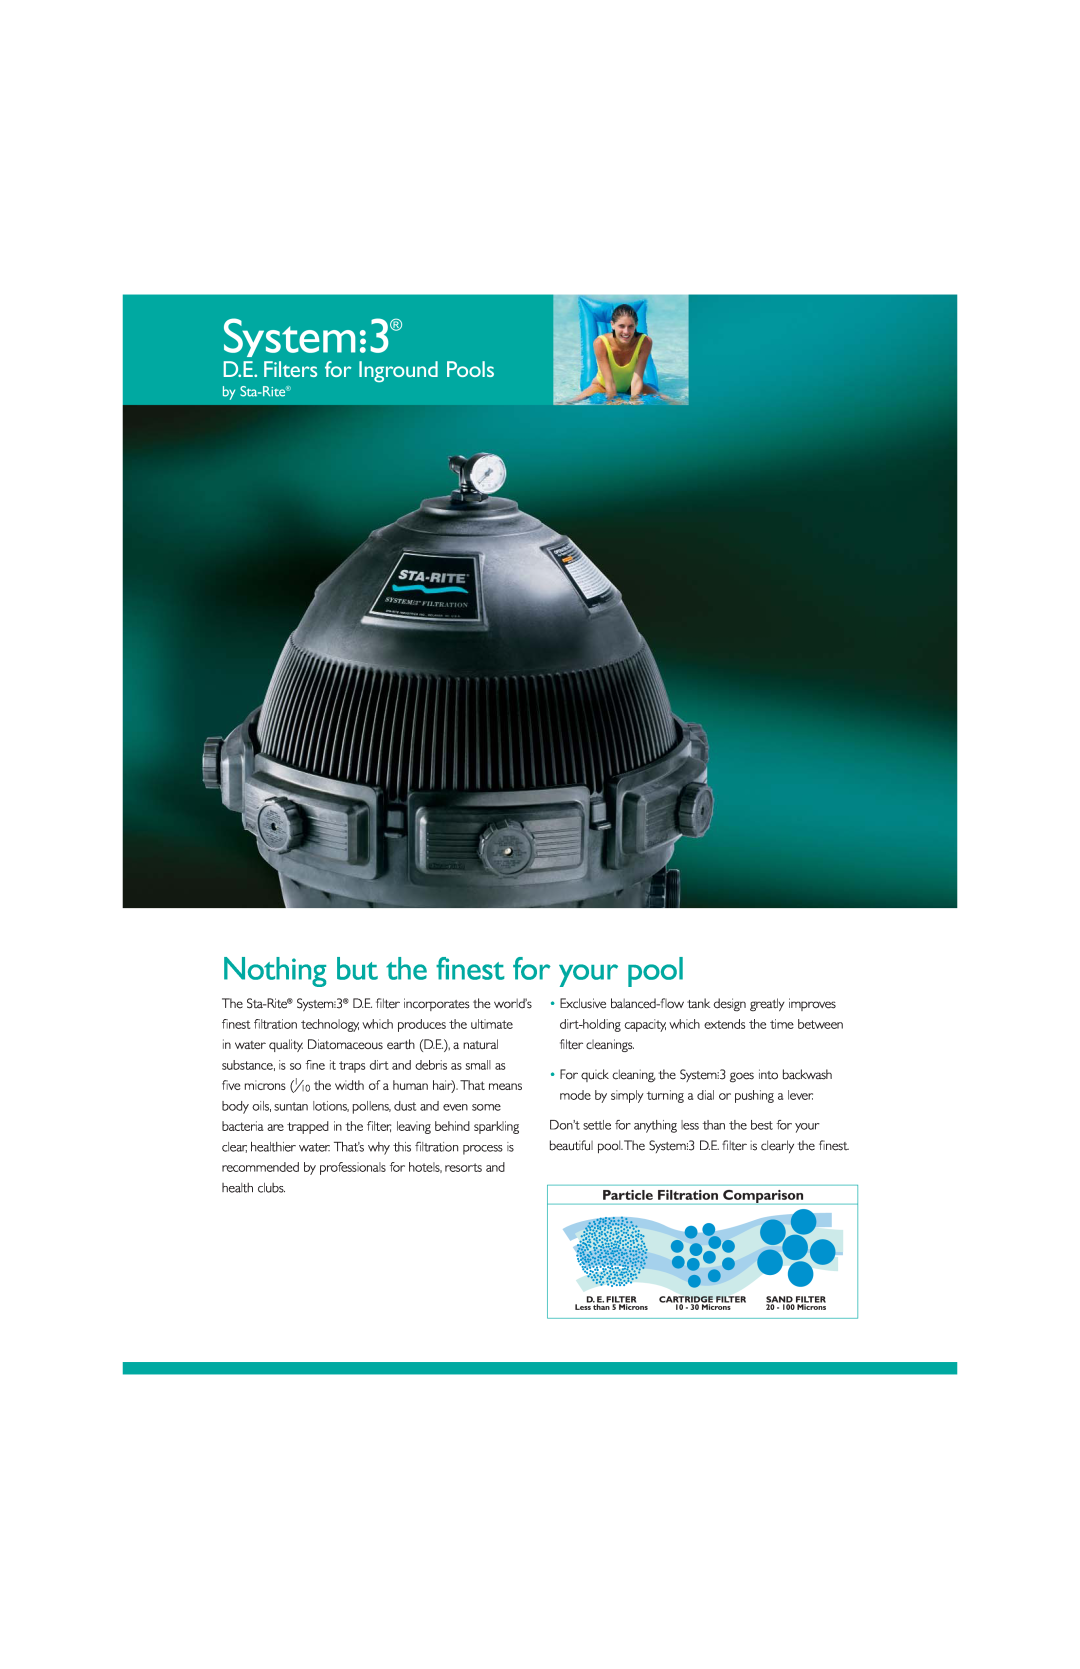 Pentair P1-717 manual Nothing but the finest for your pool, Sstem, D.E. Filters for Inground Pools, by Sta-Rite 